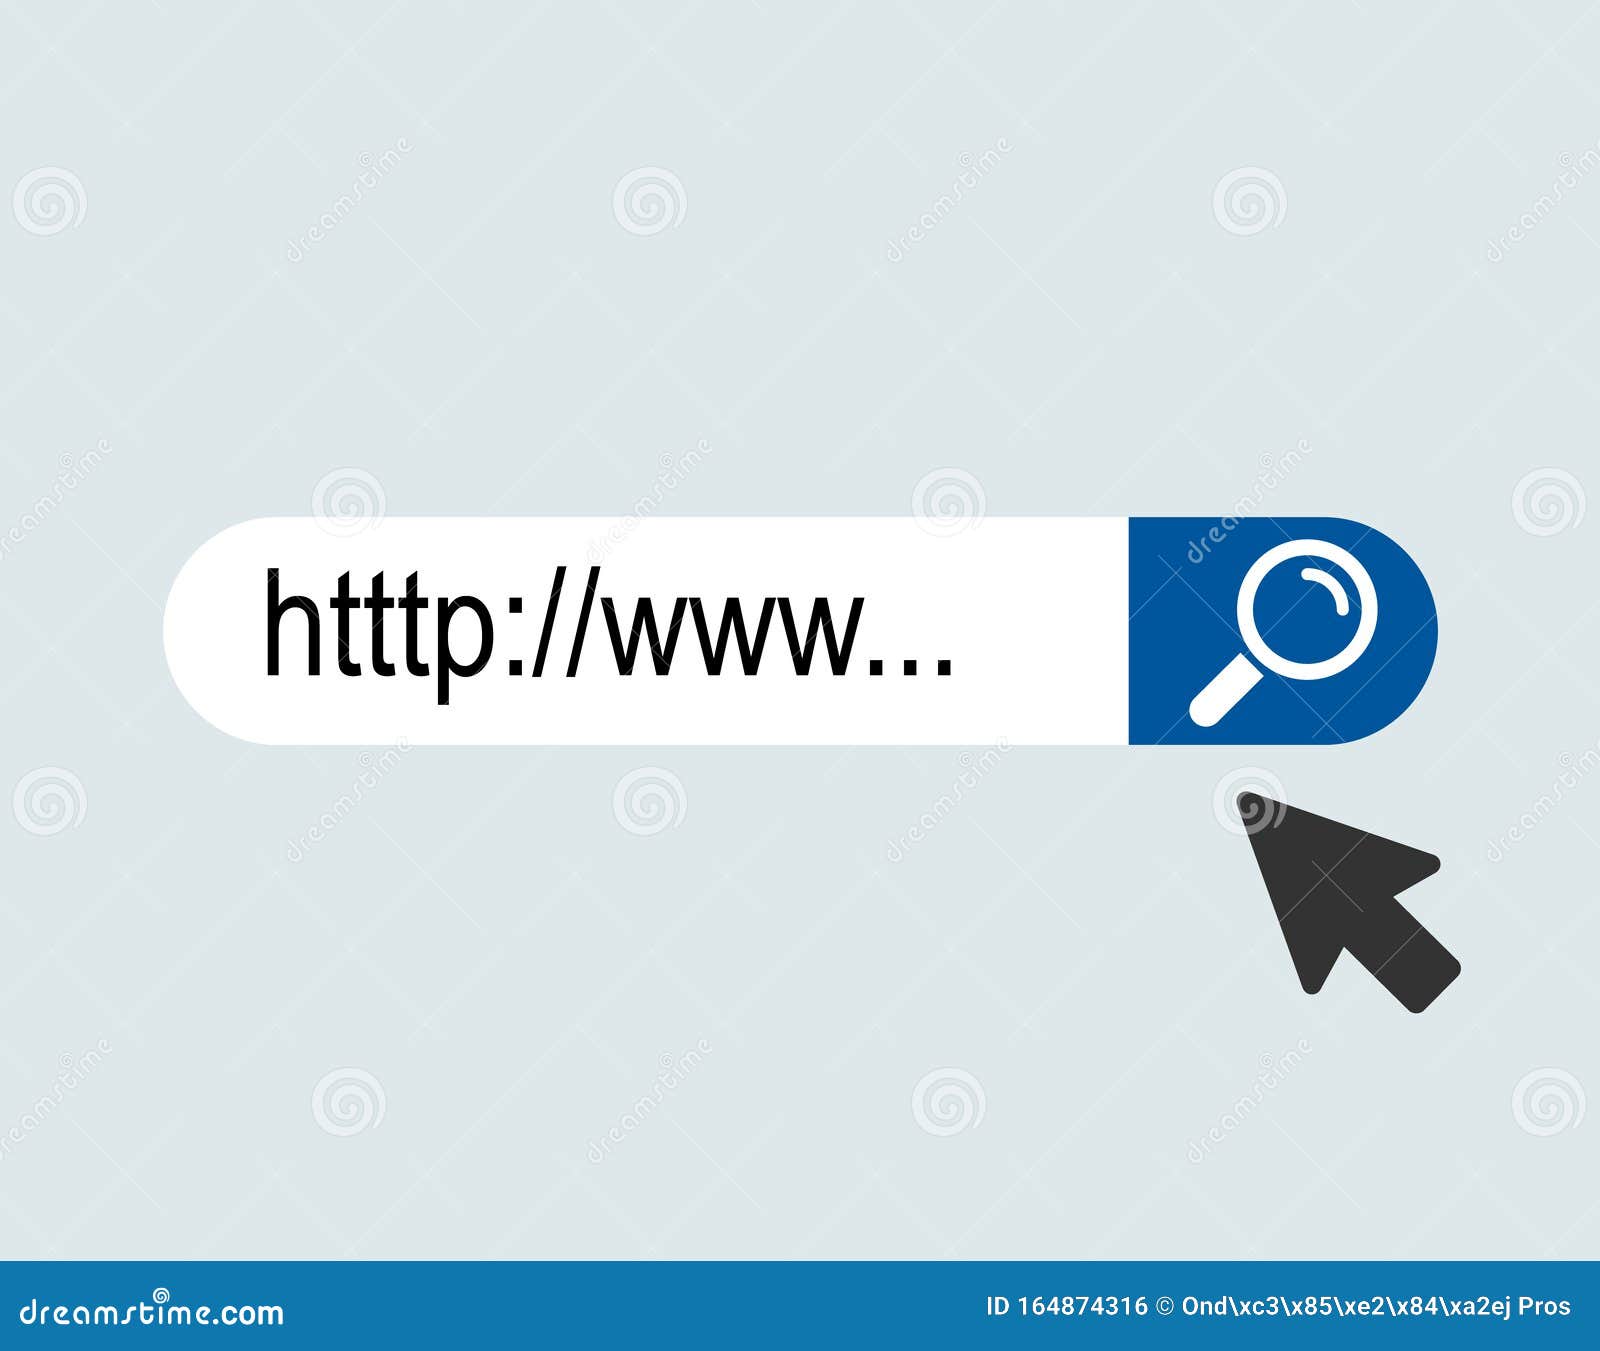 www internet search bar icon  on background.  tool for web site, app, ui and logo